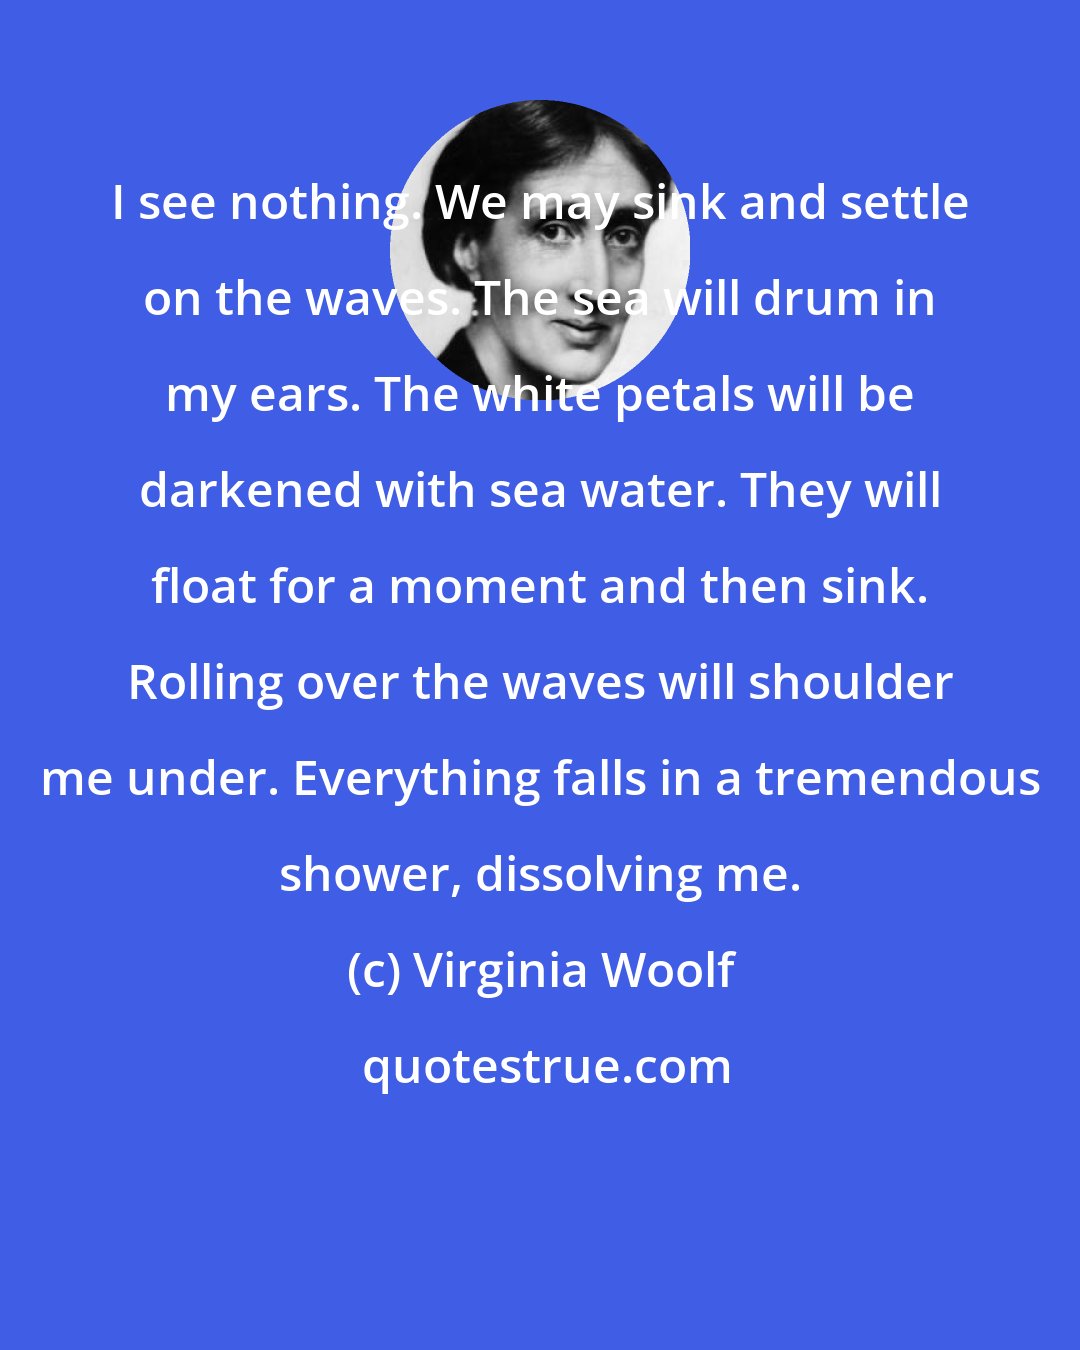 Virginia Woolf: I see nothing. We may sink and settle on the waves. The sea will drum in my ears. The white petals will be darkened with sea water. They will float for a moment and then sink. Rolling over the waves will shoulder me under. Everything falls in a tremendous shower, dissolving me.